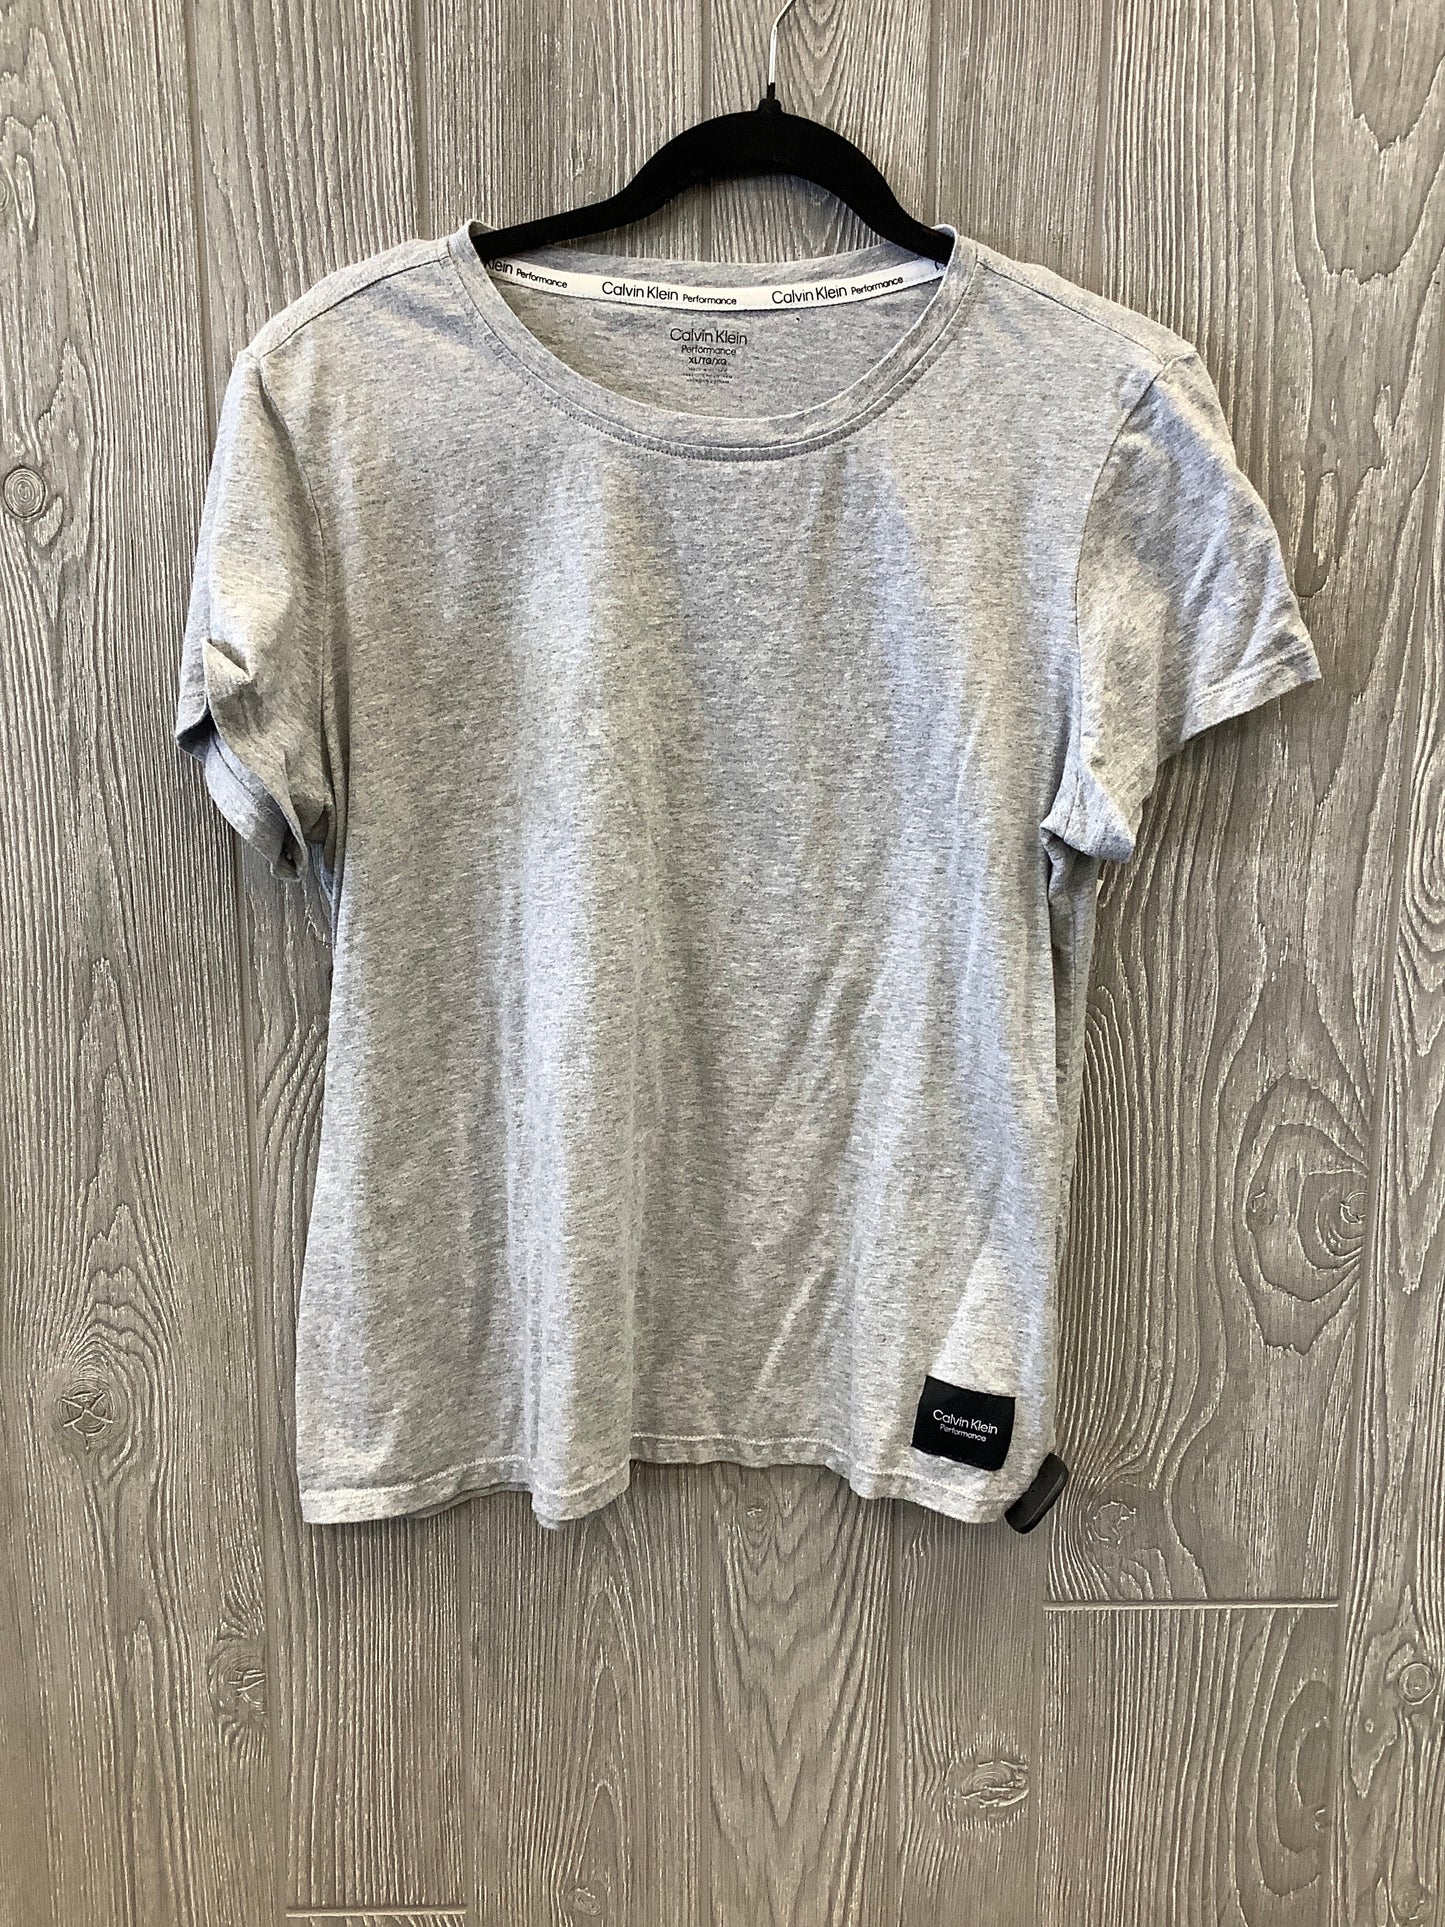 Athletic Top Short Sleeve By Calvin Klein  Size: Xl